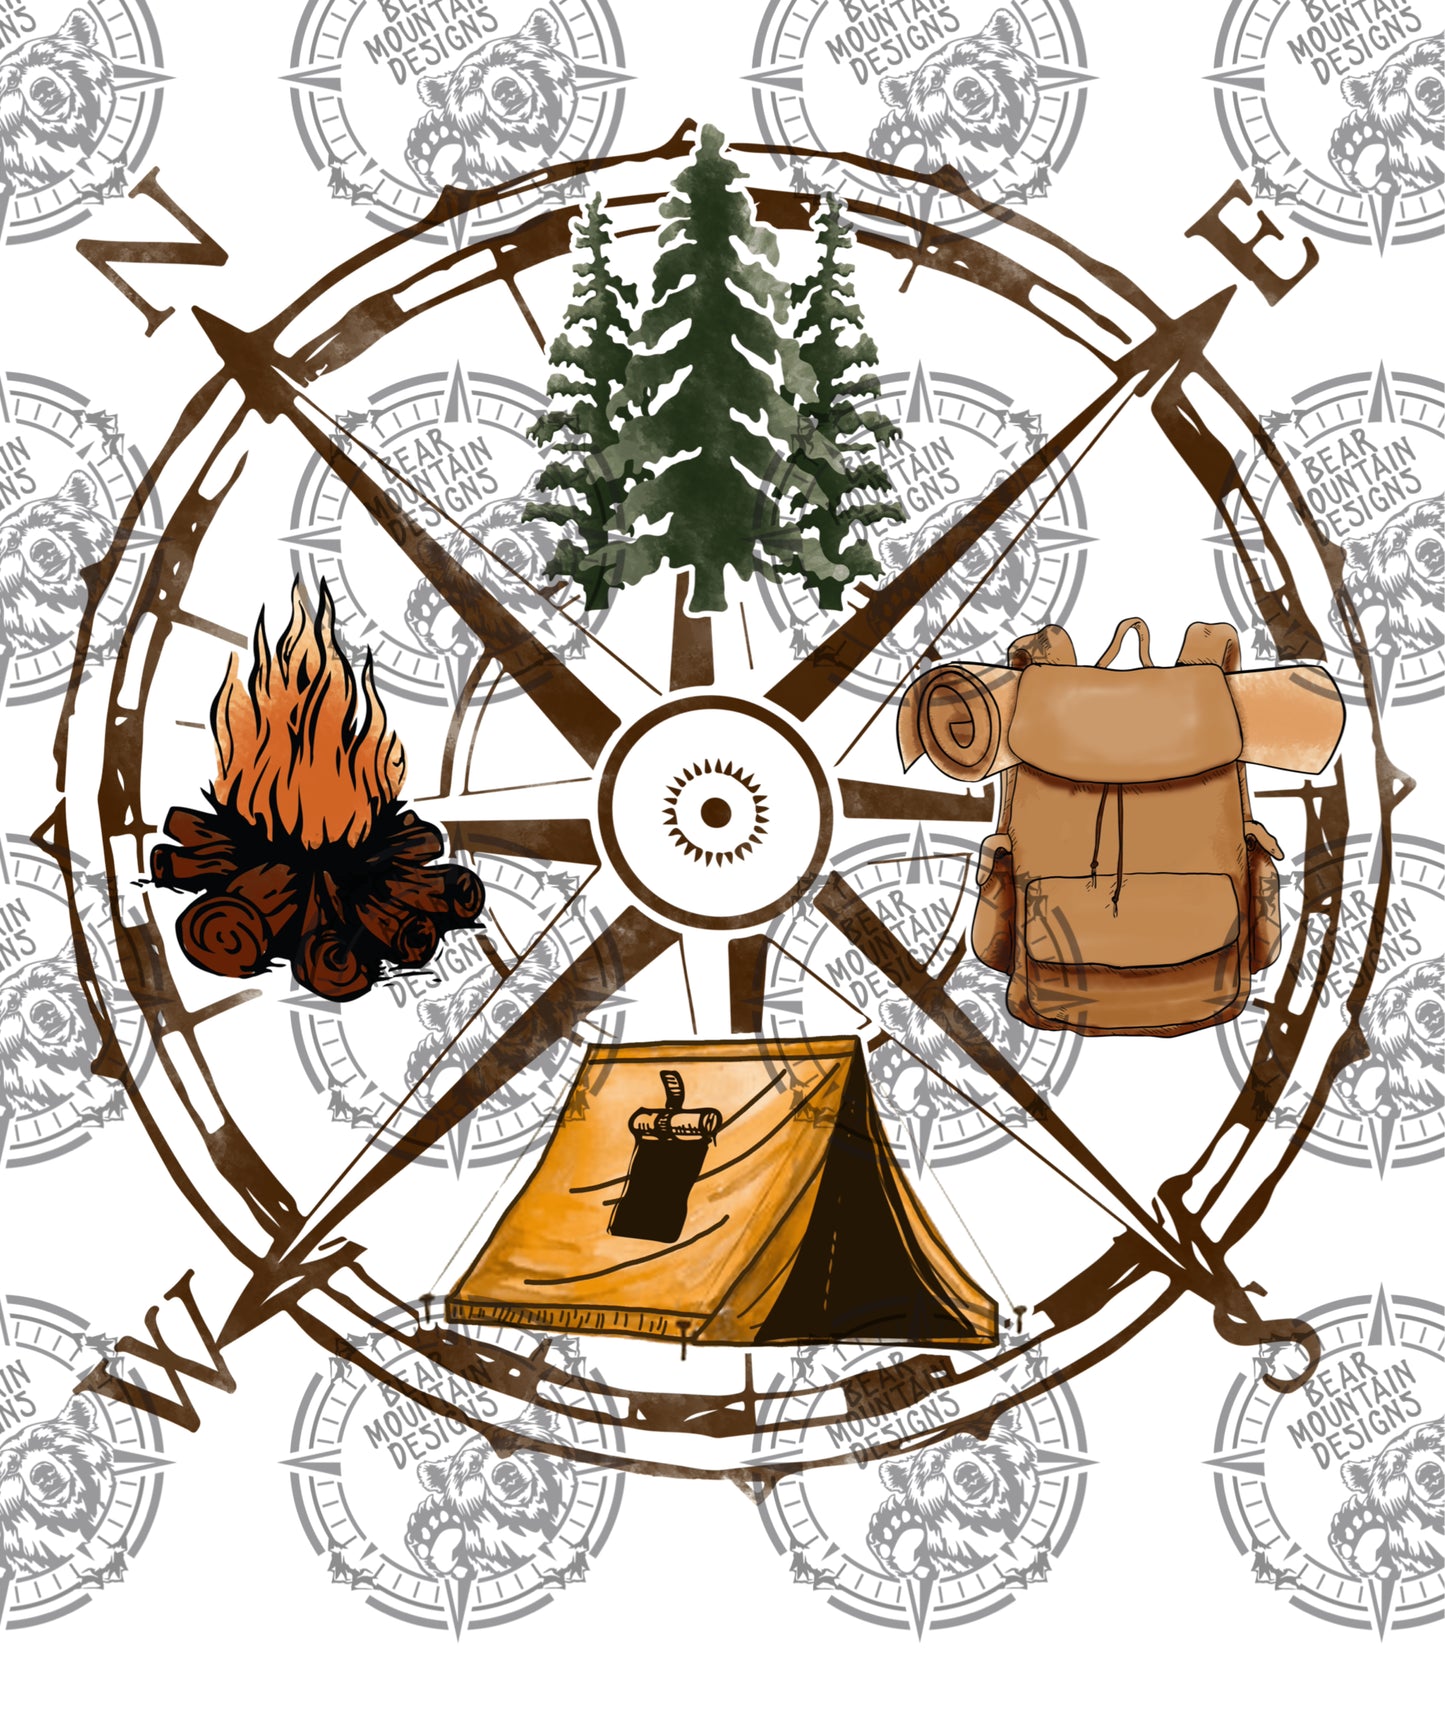 Camping Compass